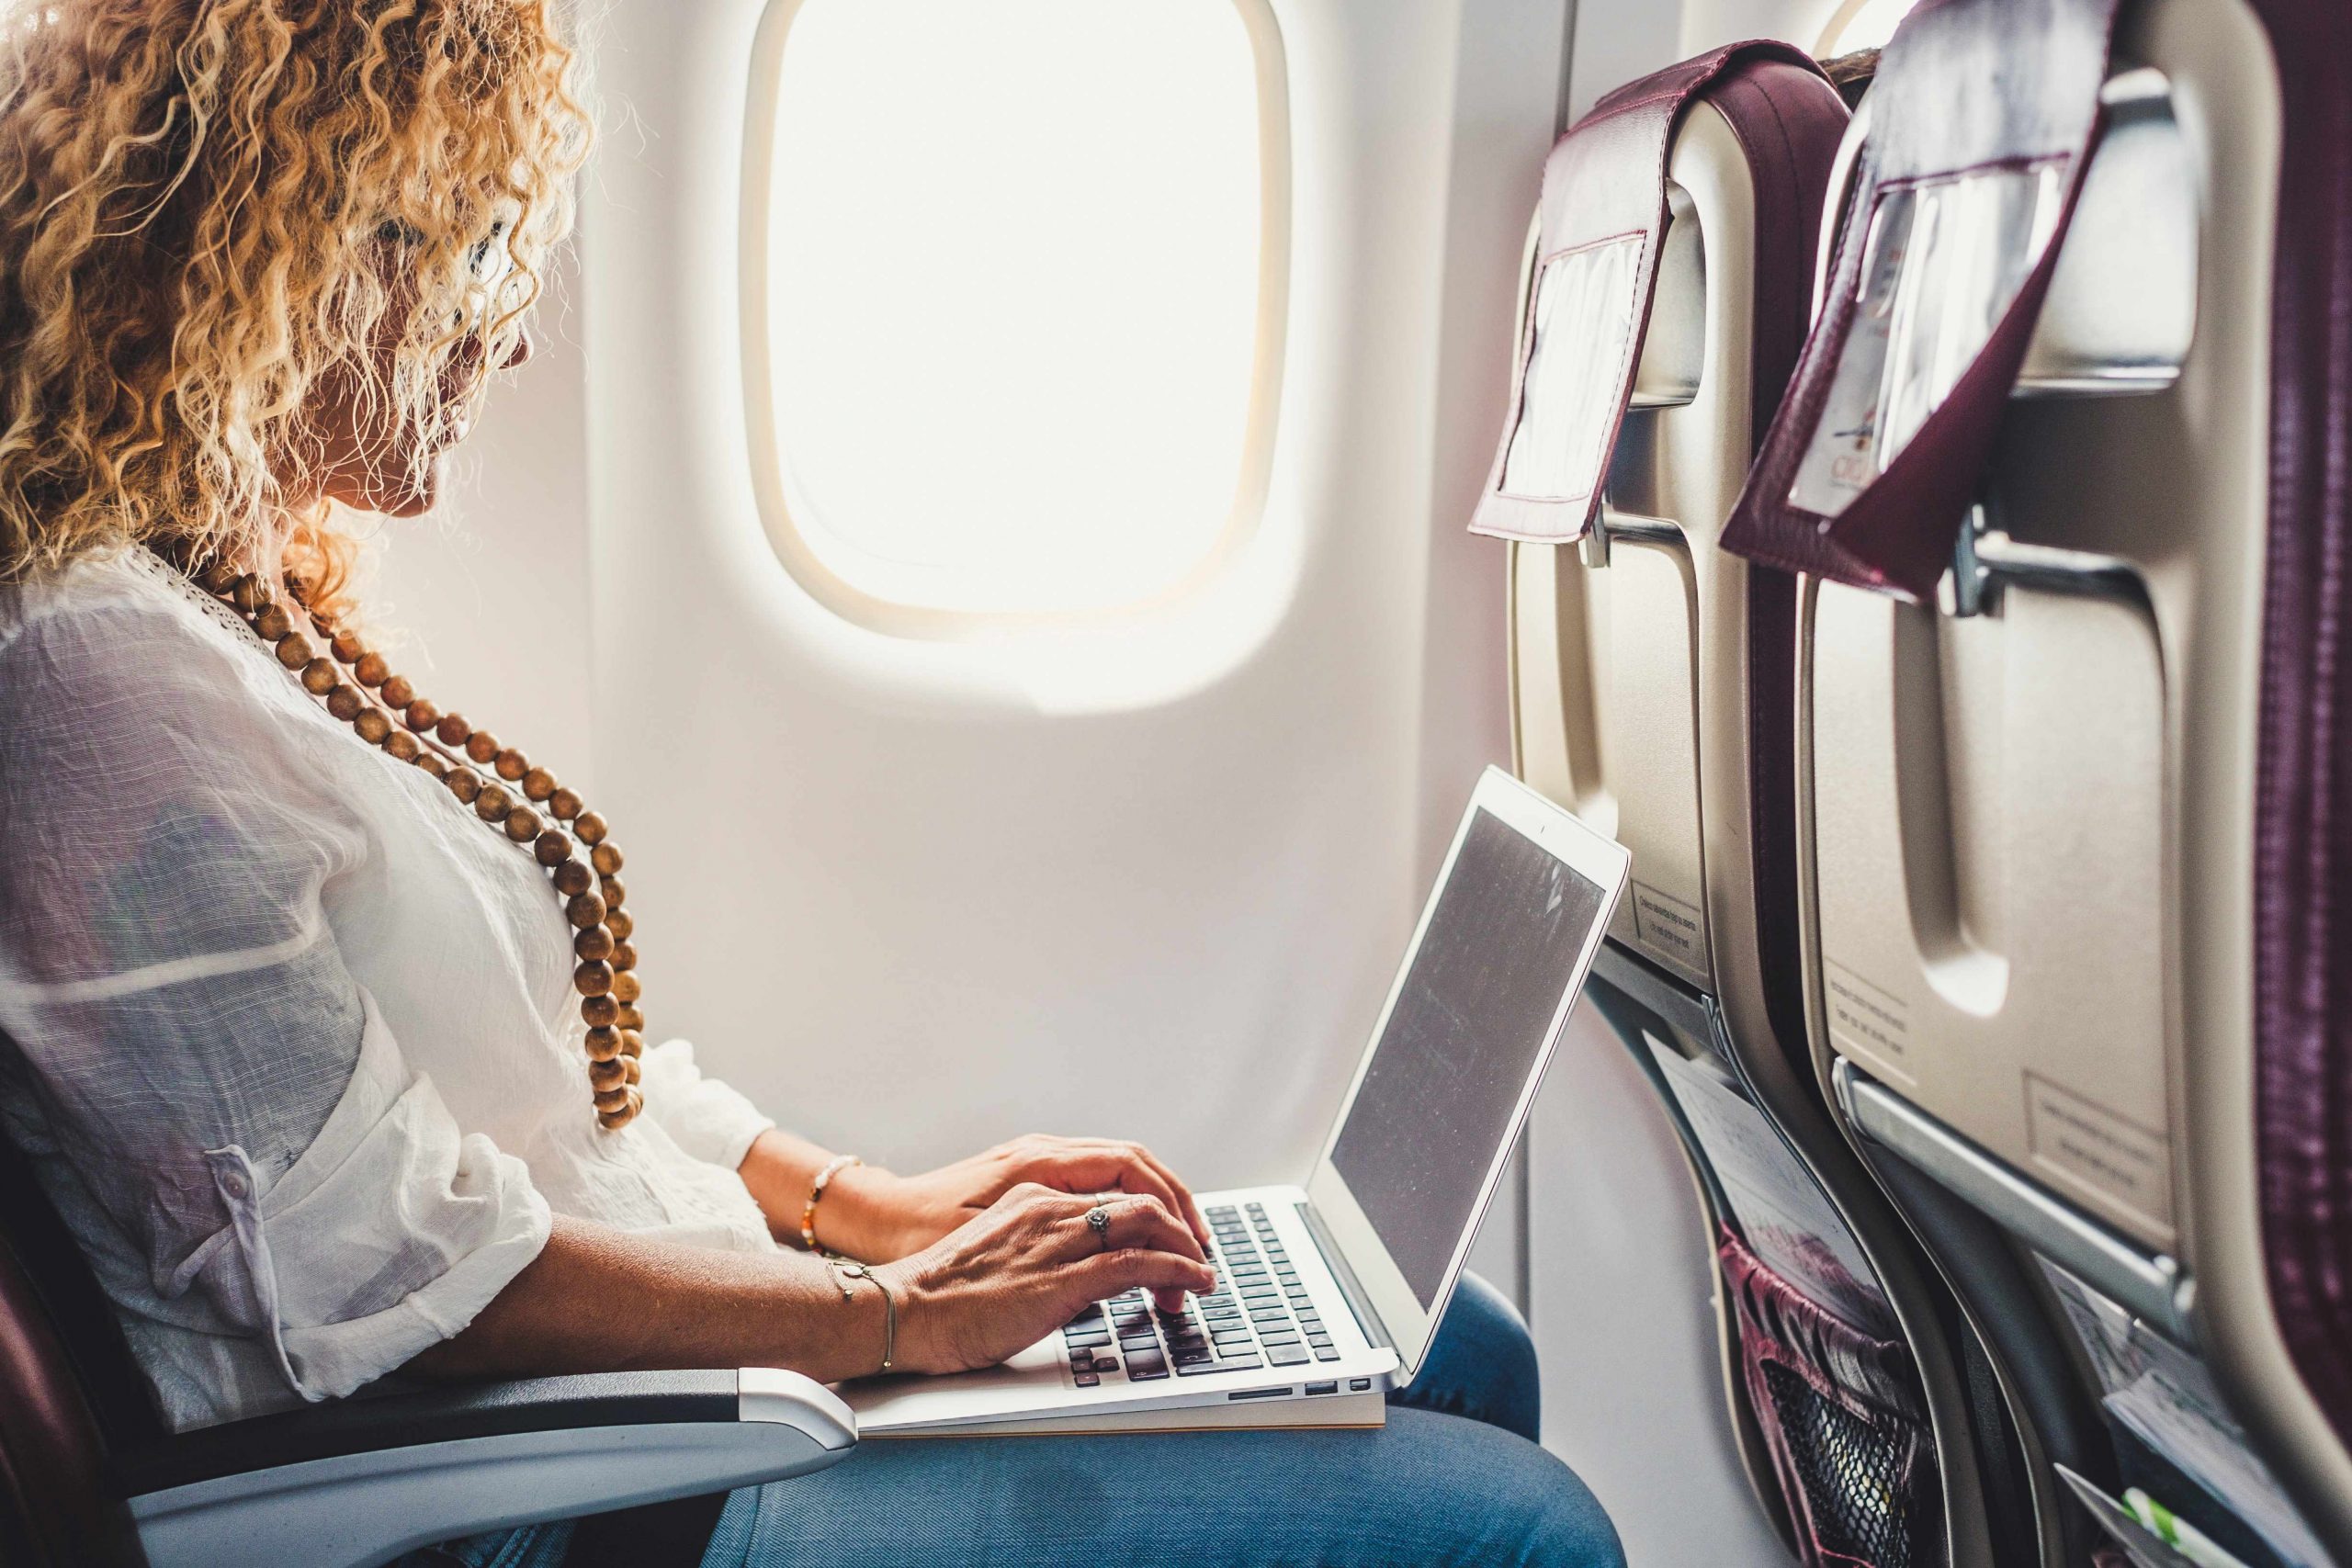 How Secure Is an Airplane’s Wi-Fi?